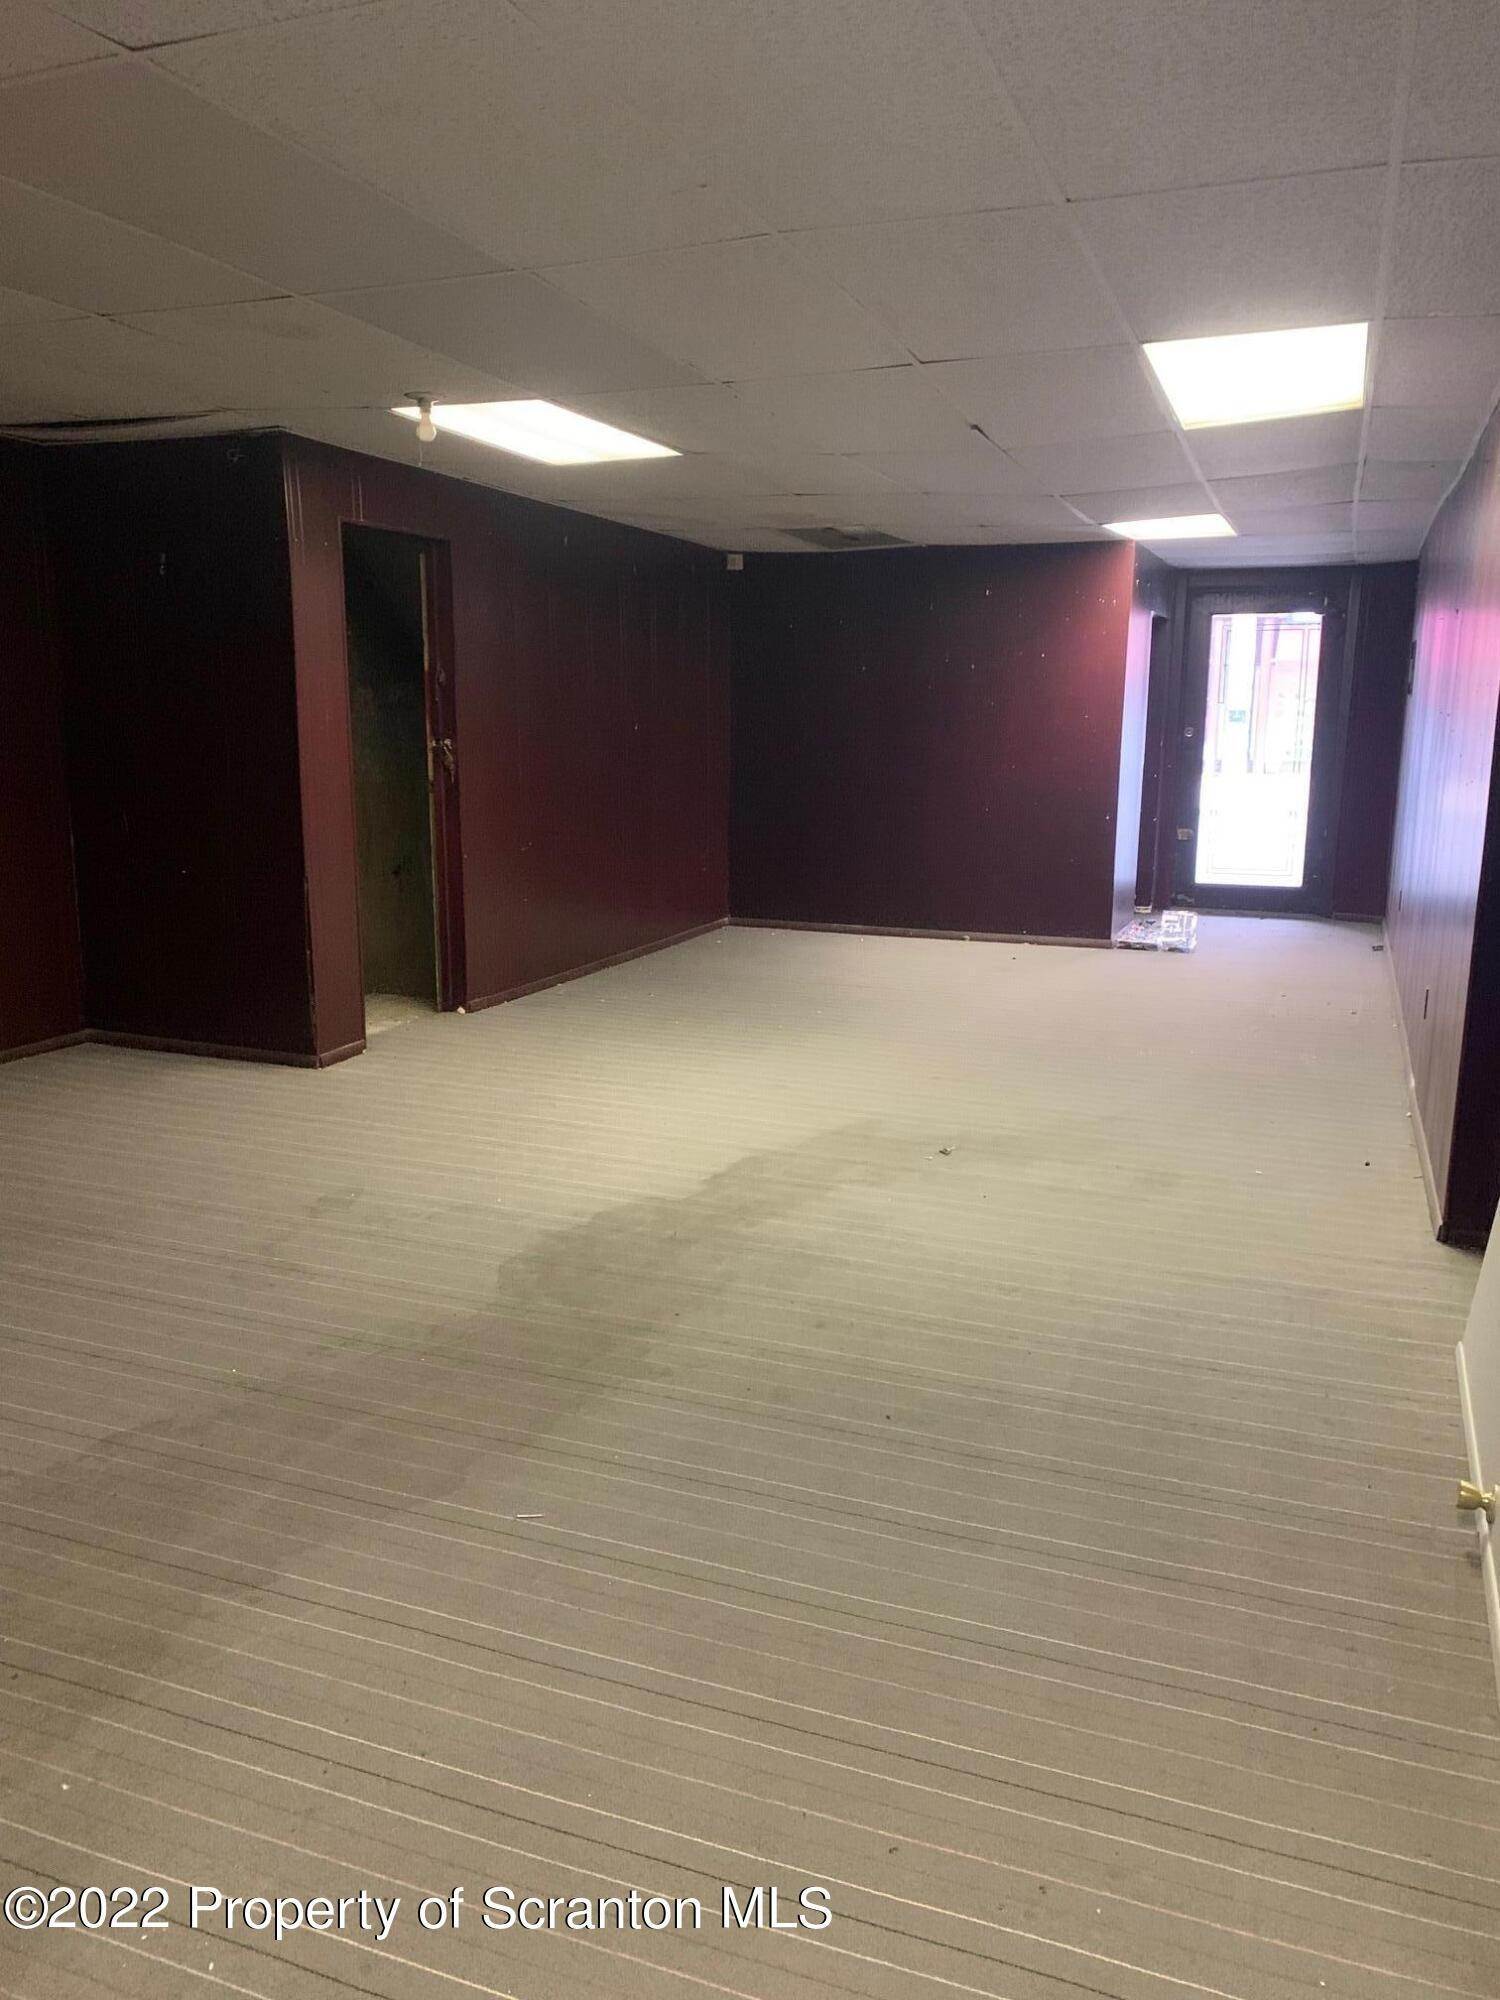 5. Commercial for Rent at 1820 Sanderson Ave Scranton, Pennsylvania 18509 United States